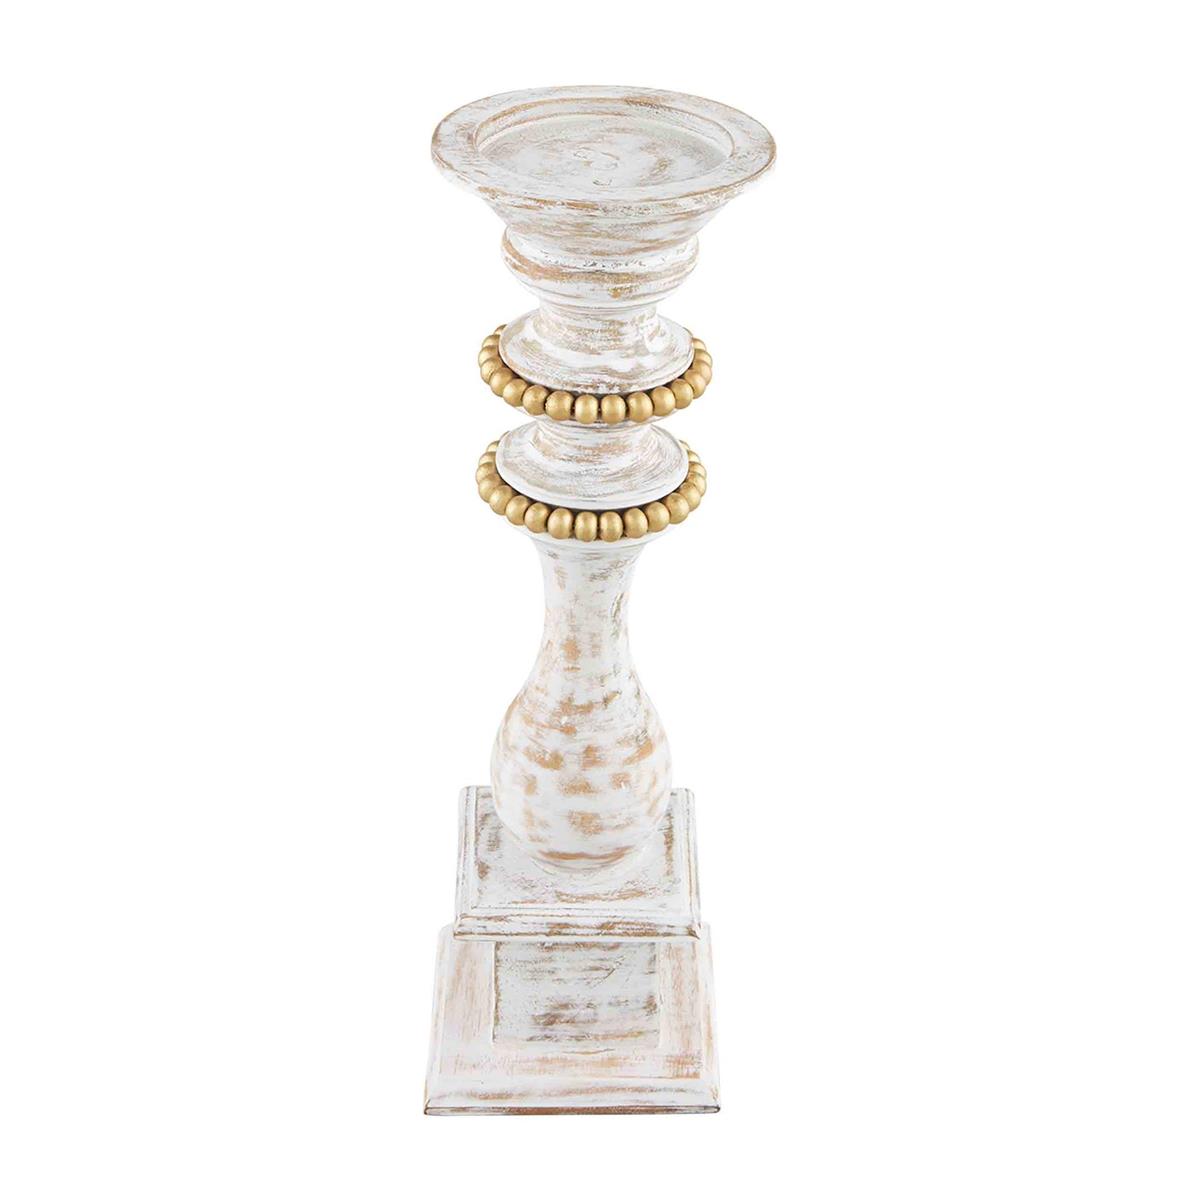 small gold bead candlestick displayed against a white background